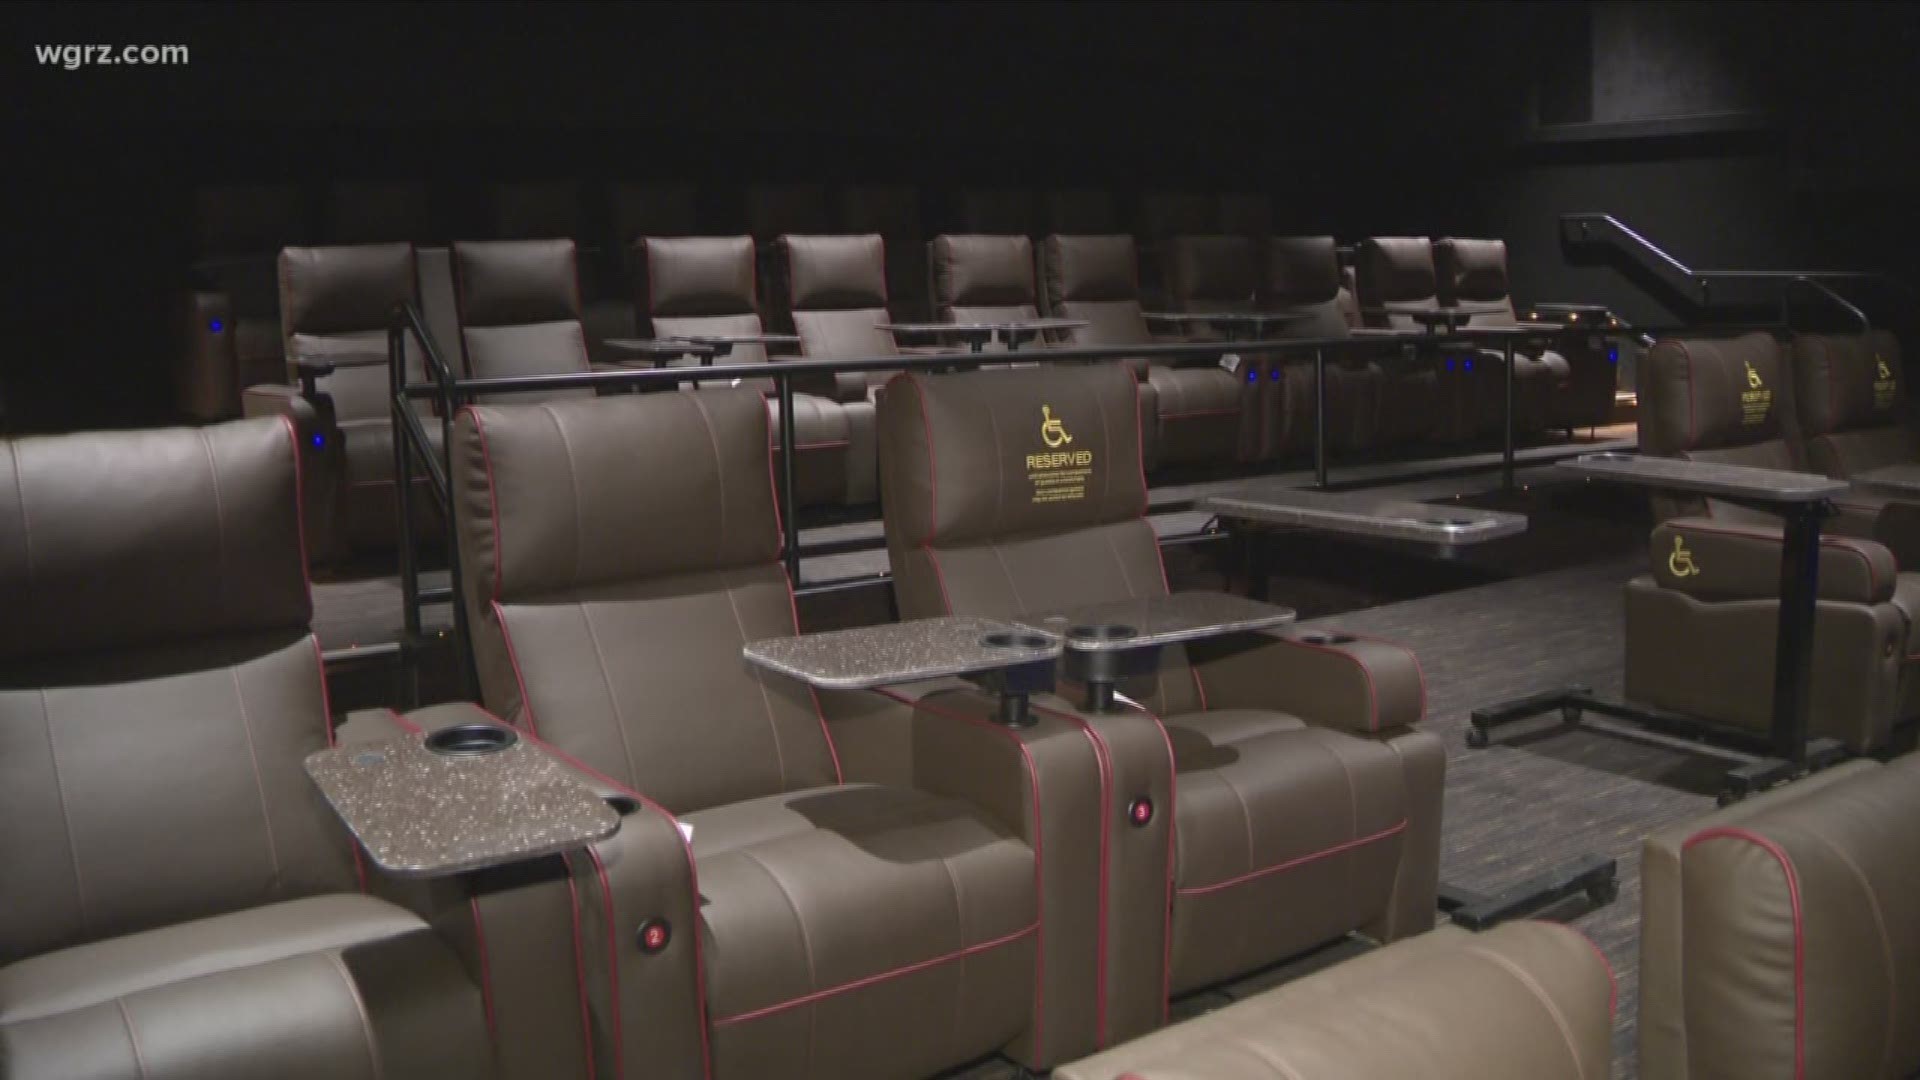 Downtown AMC Movie Theater Will Open Thursday